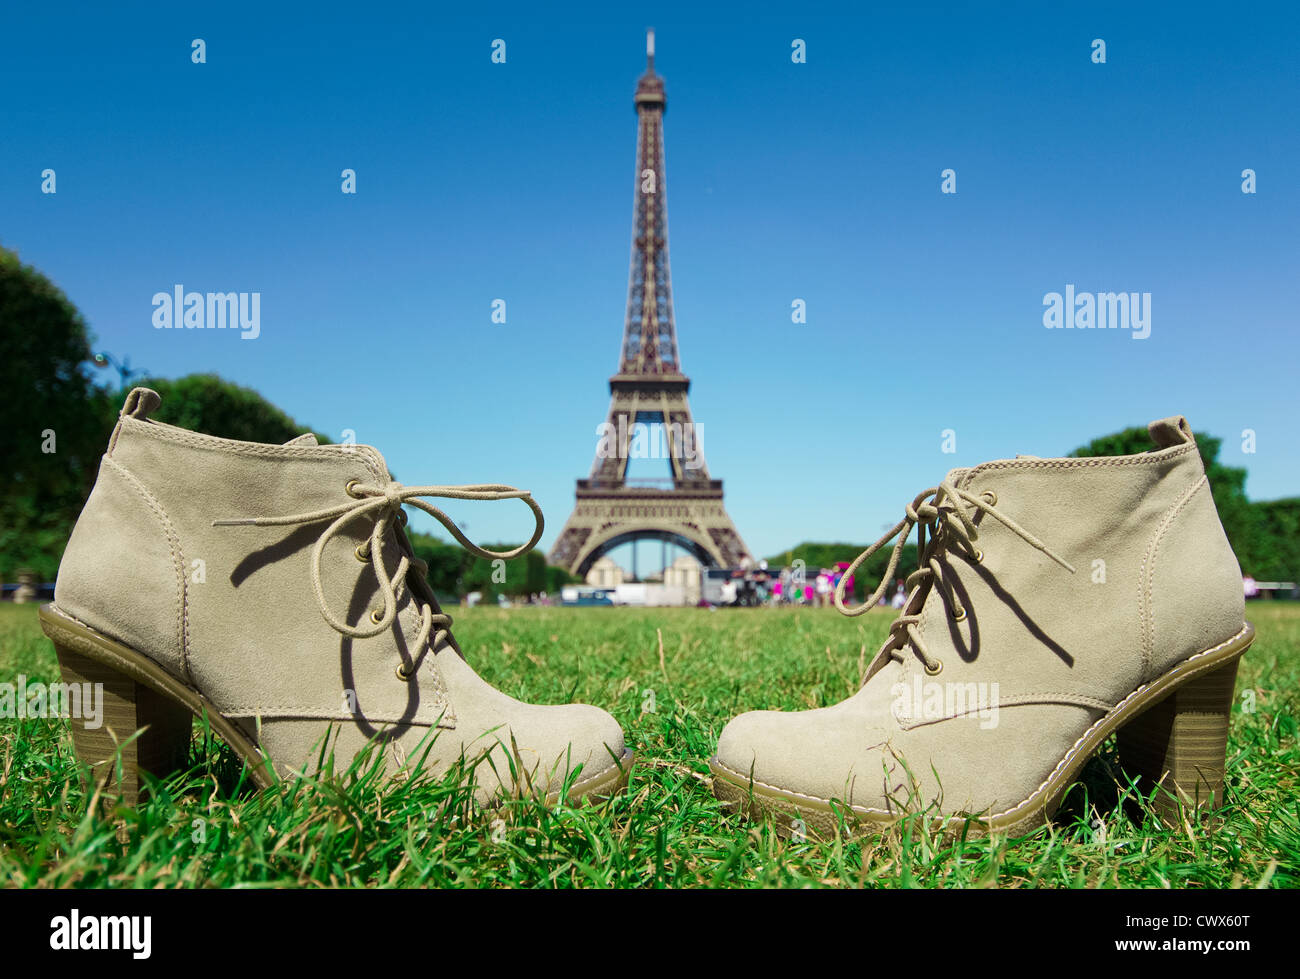 Shoes relaxing in a park near Eiffel Tower in Paris, France Stock Photo